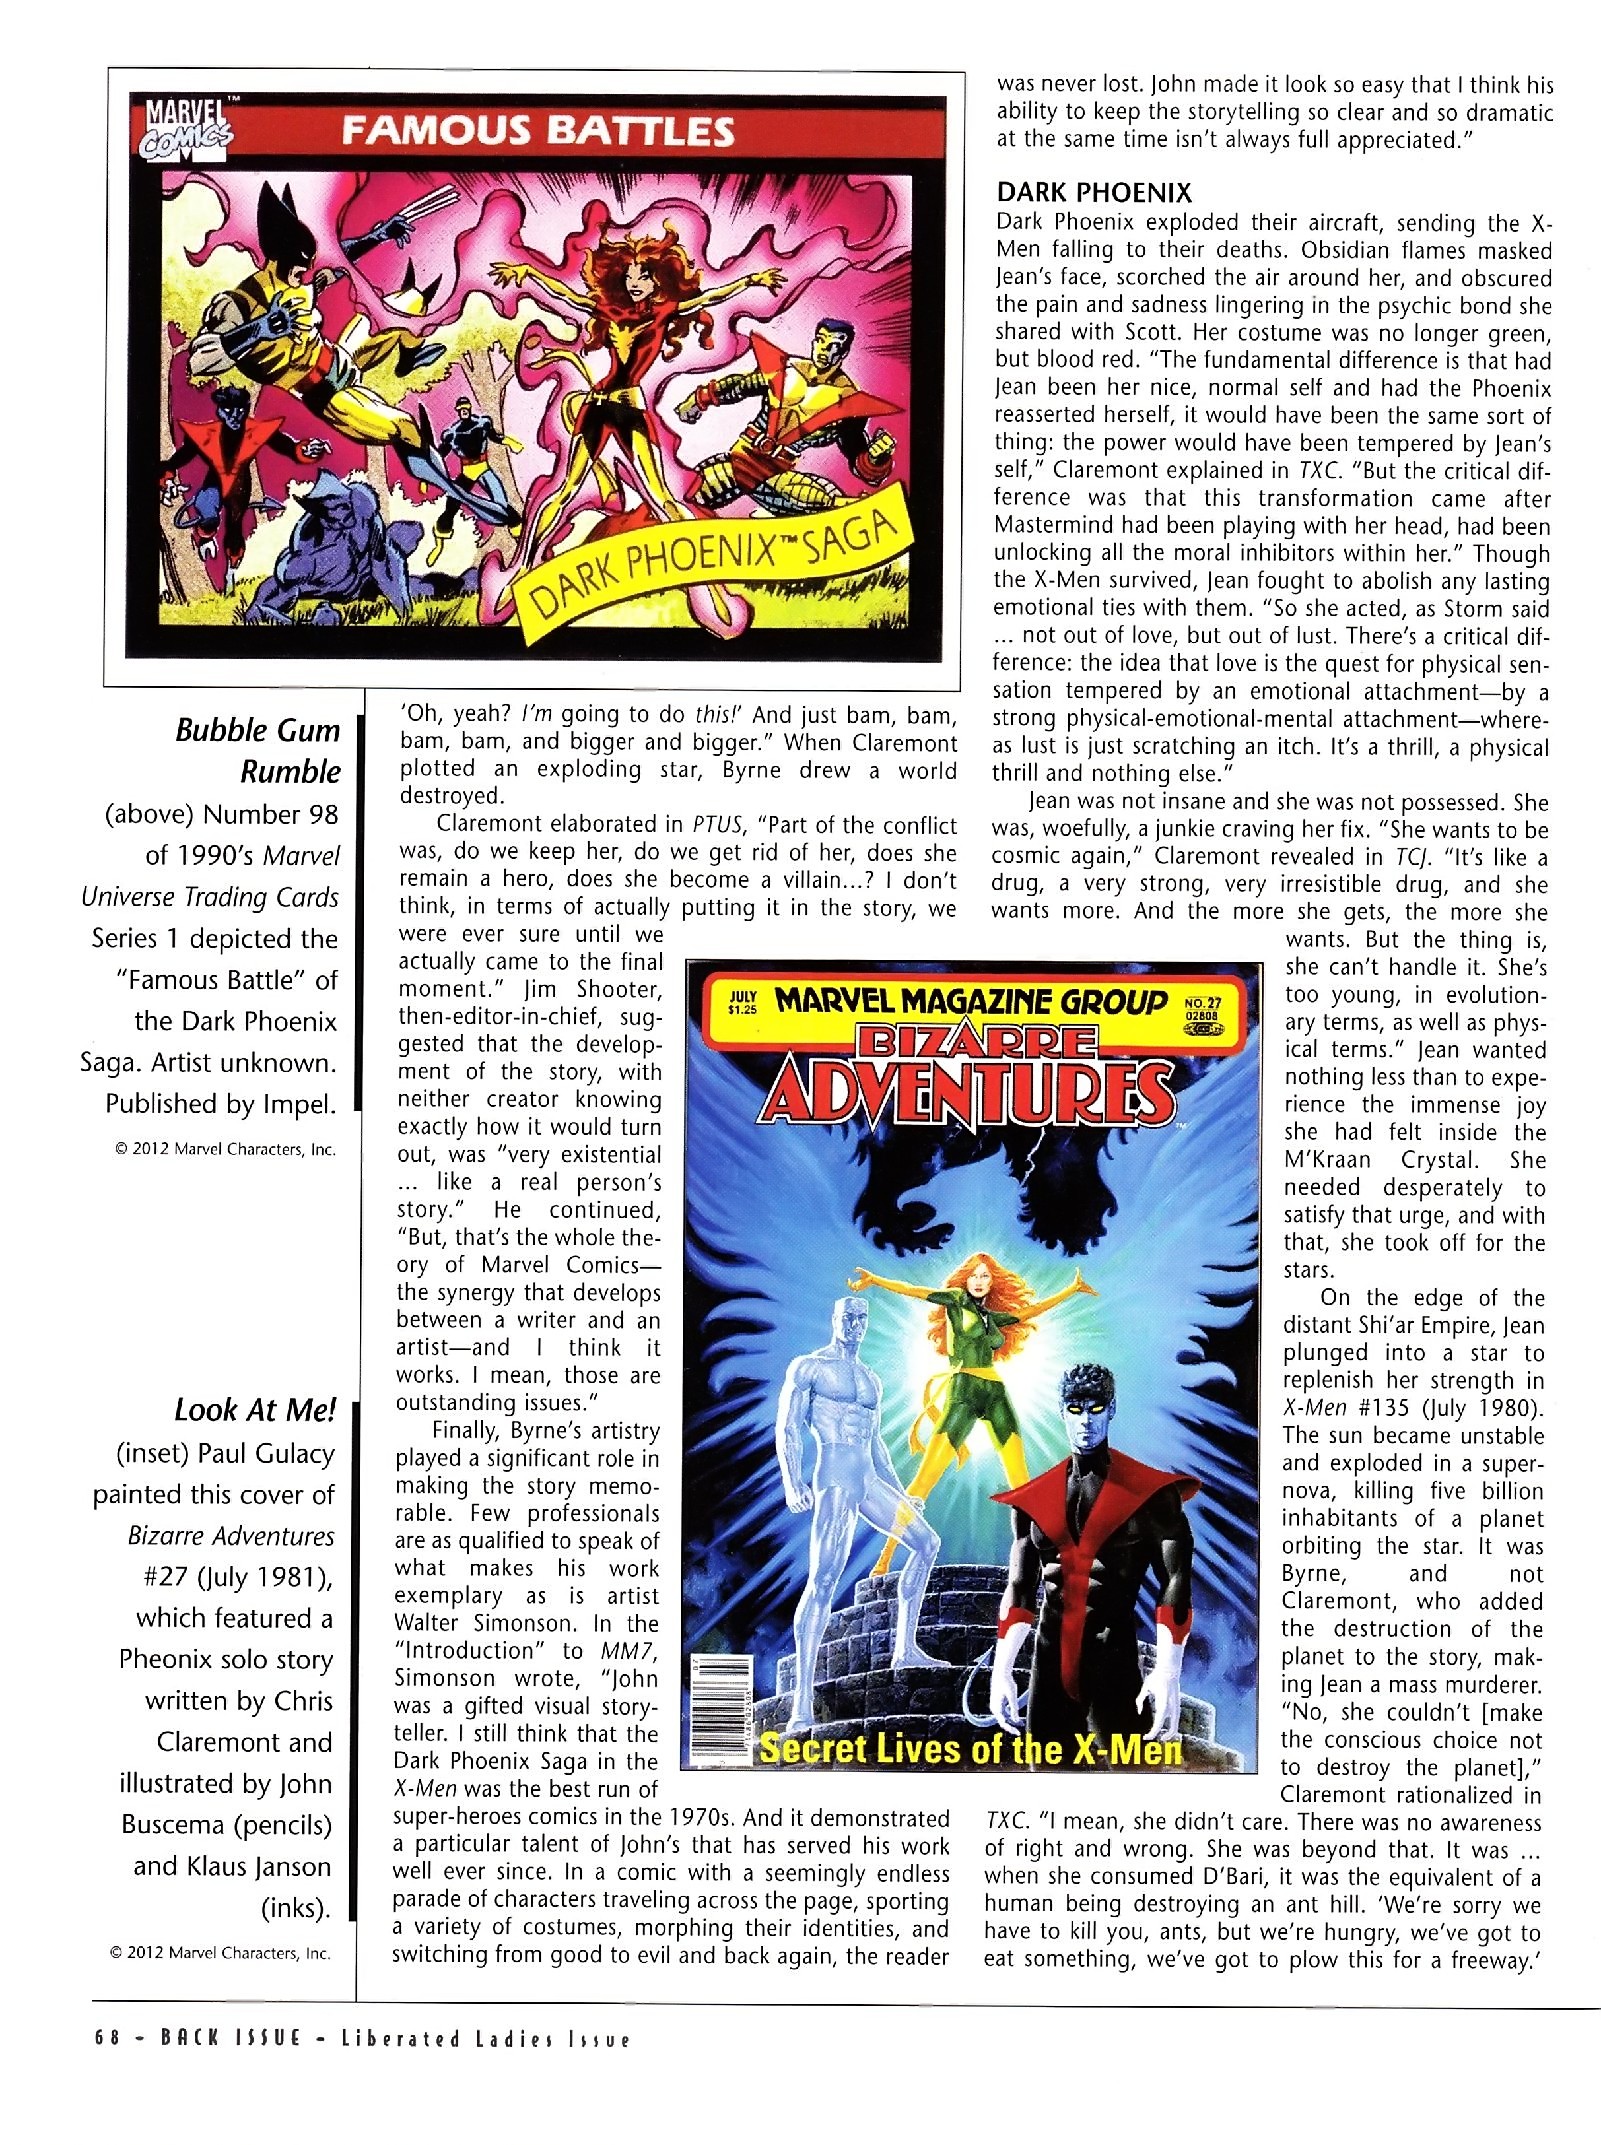 Read online Back Issue comic -  Issue #54 - 67